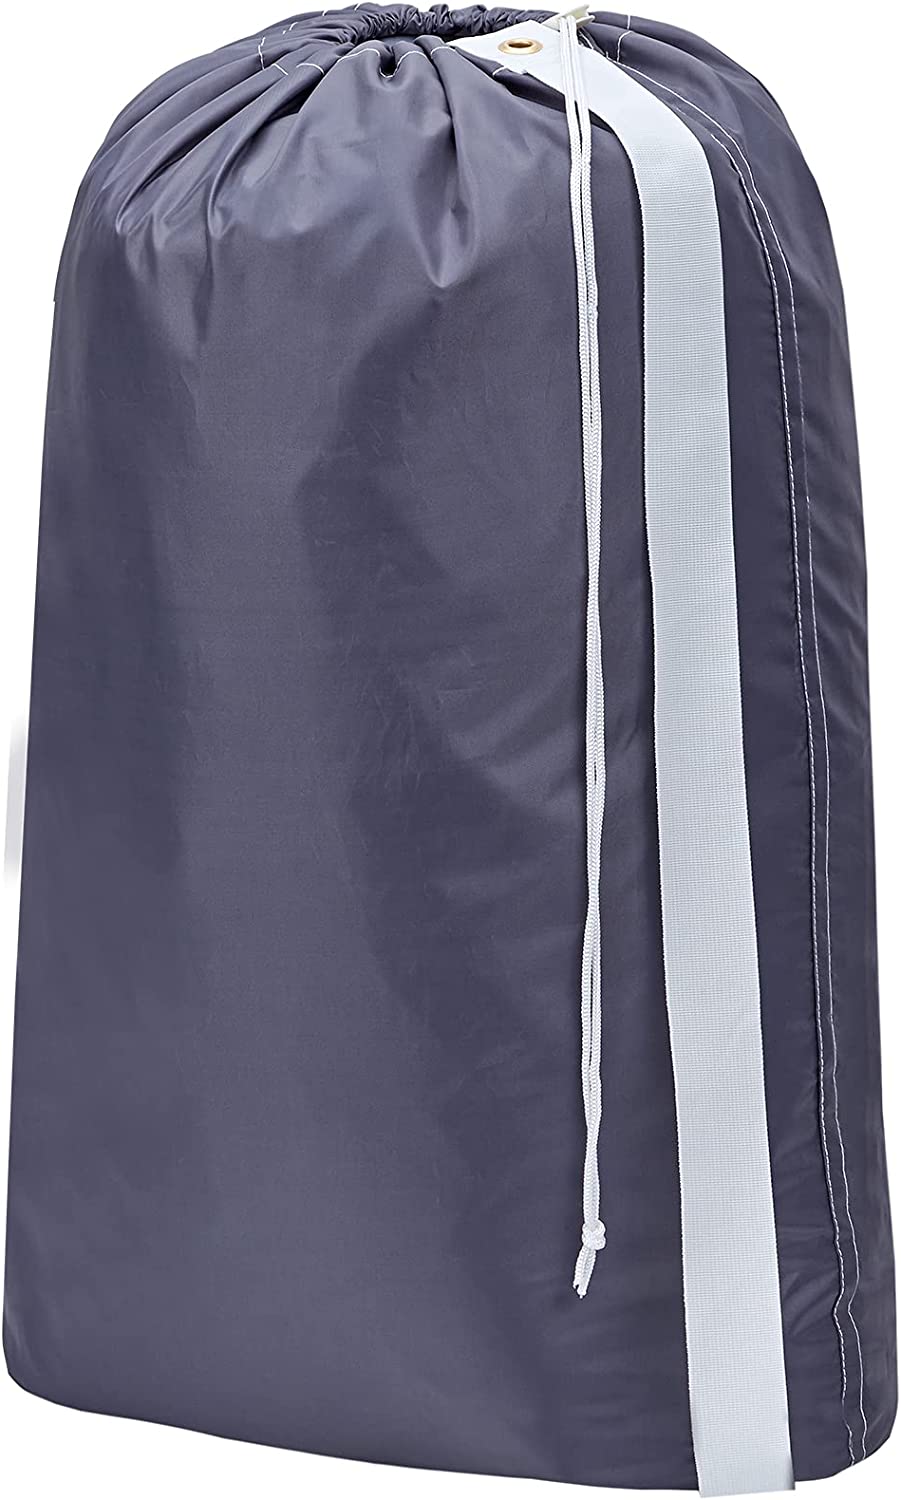 HOMEST Double-Seamed Anti-Odor Laundry Bag